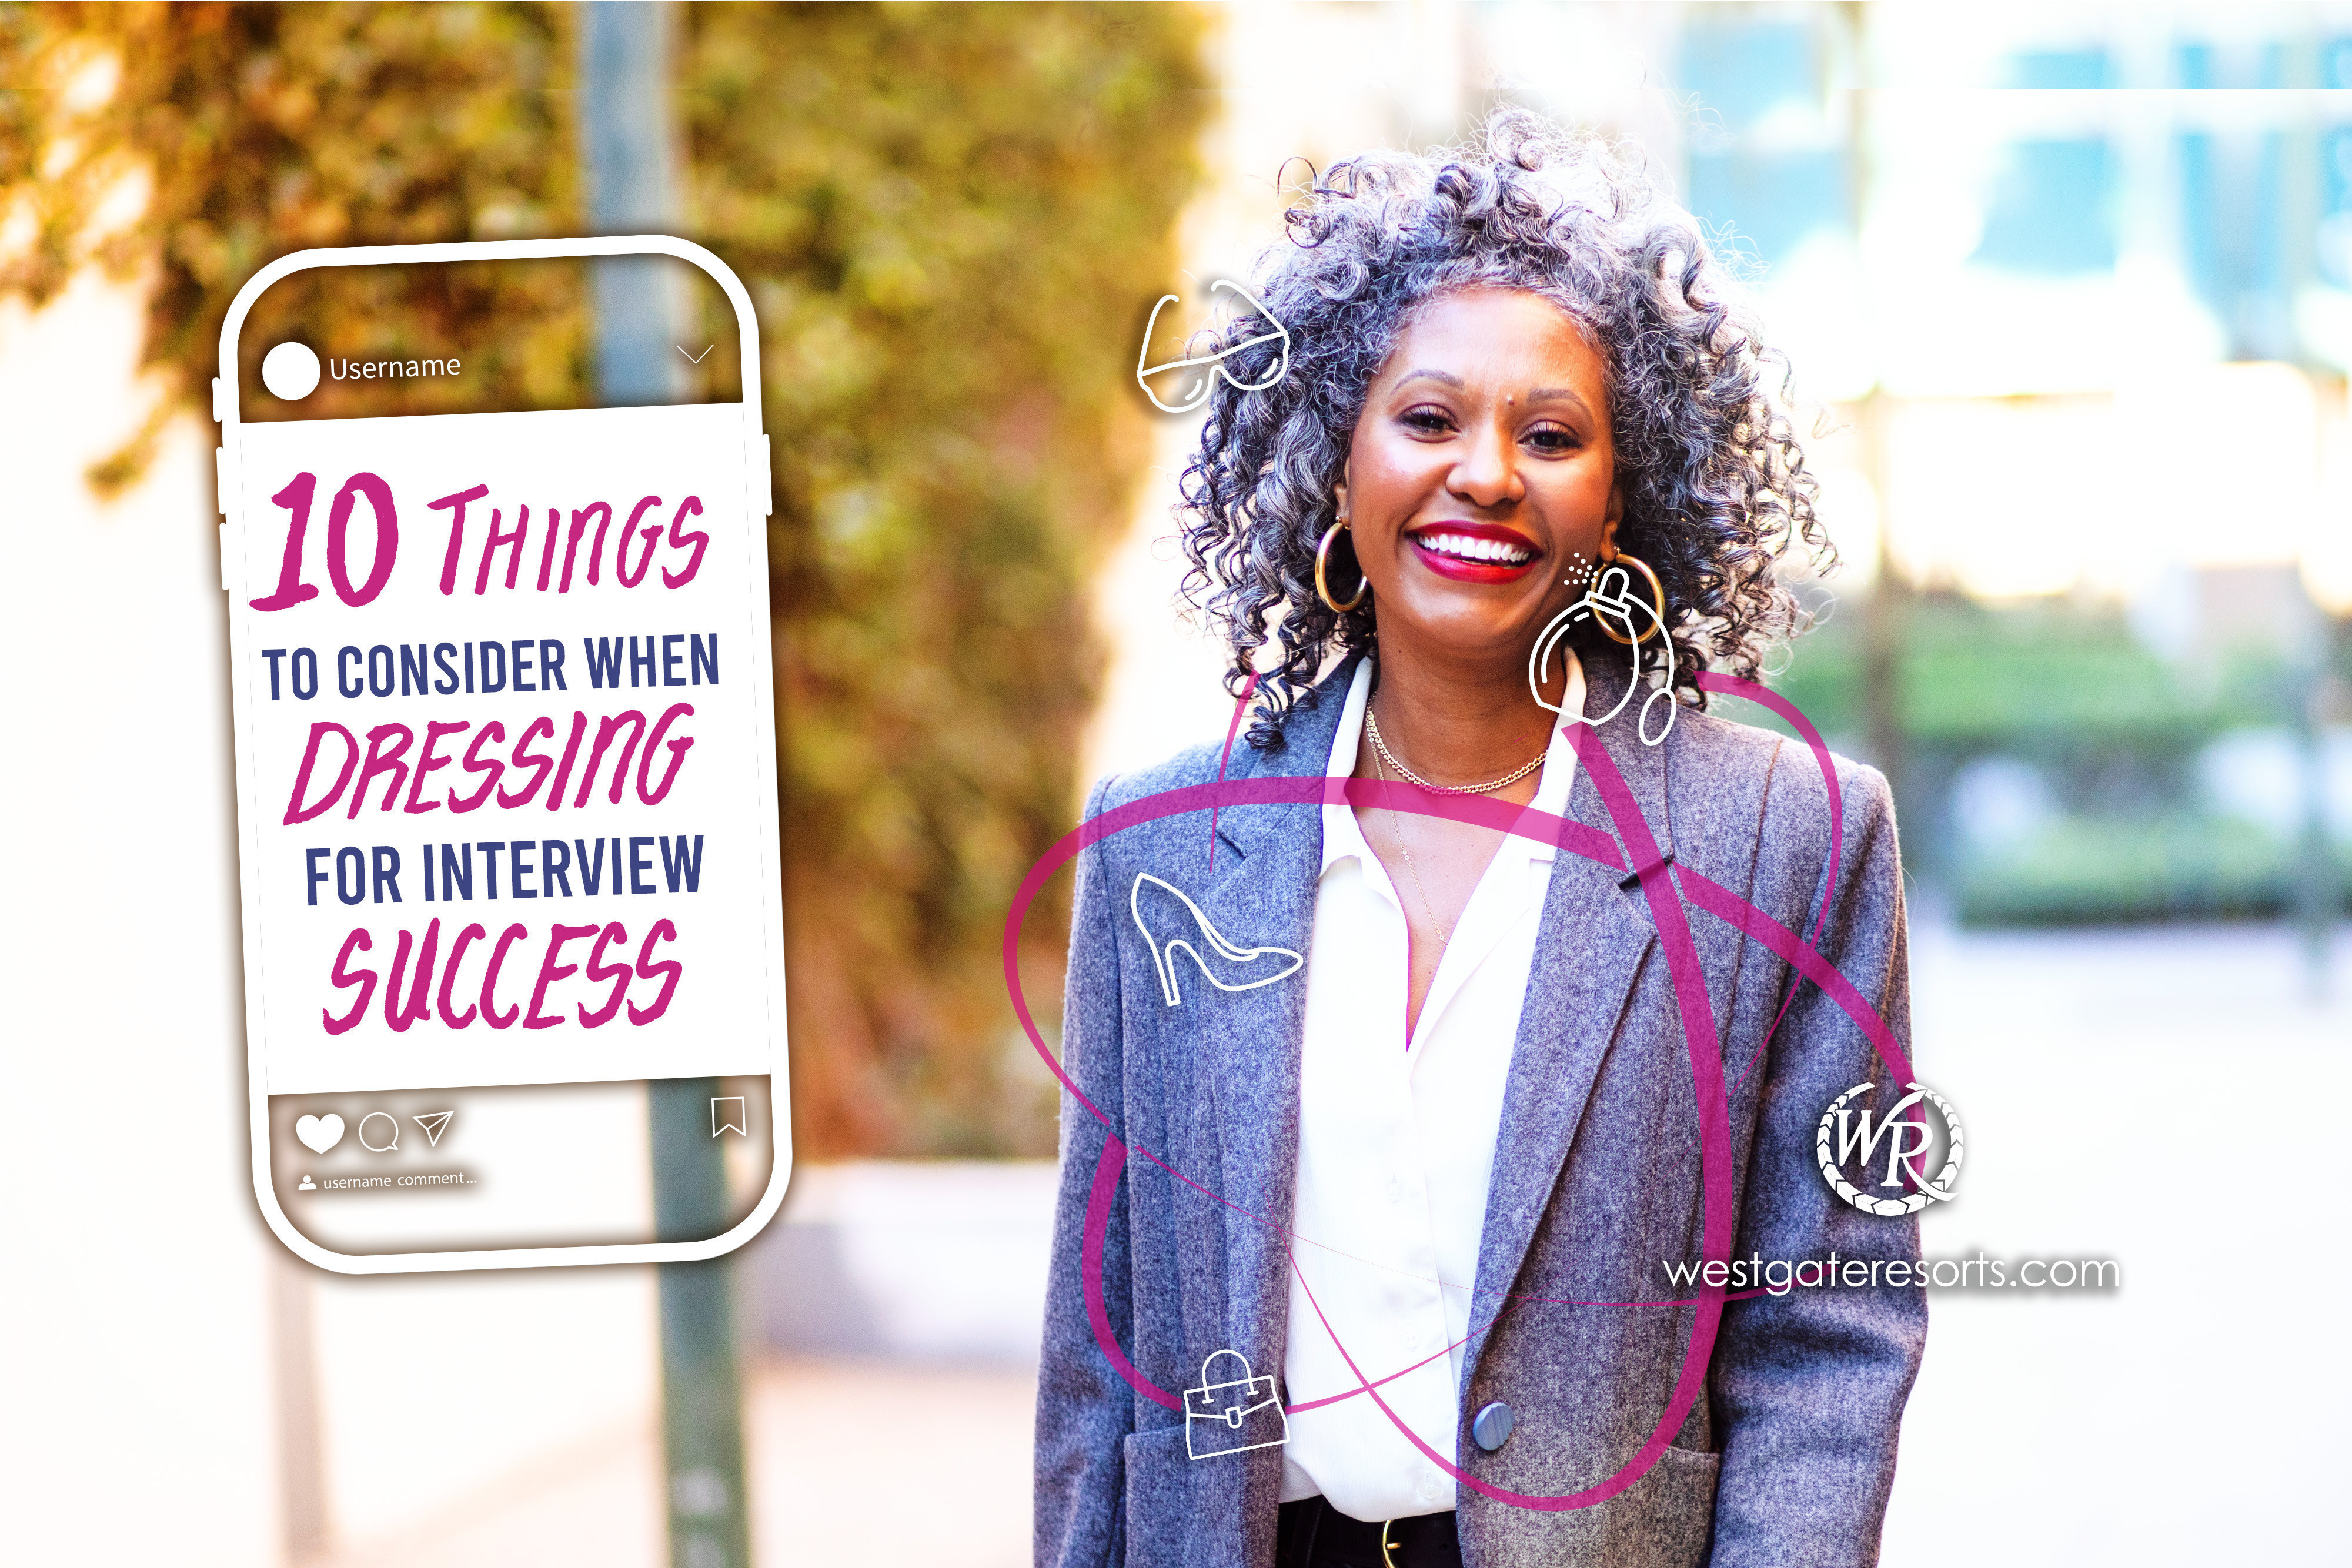 10 Things to Consider When Dressing for Interview Success